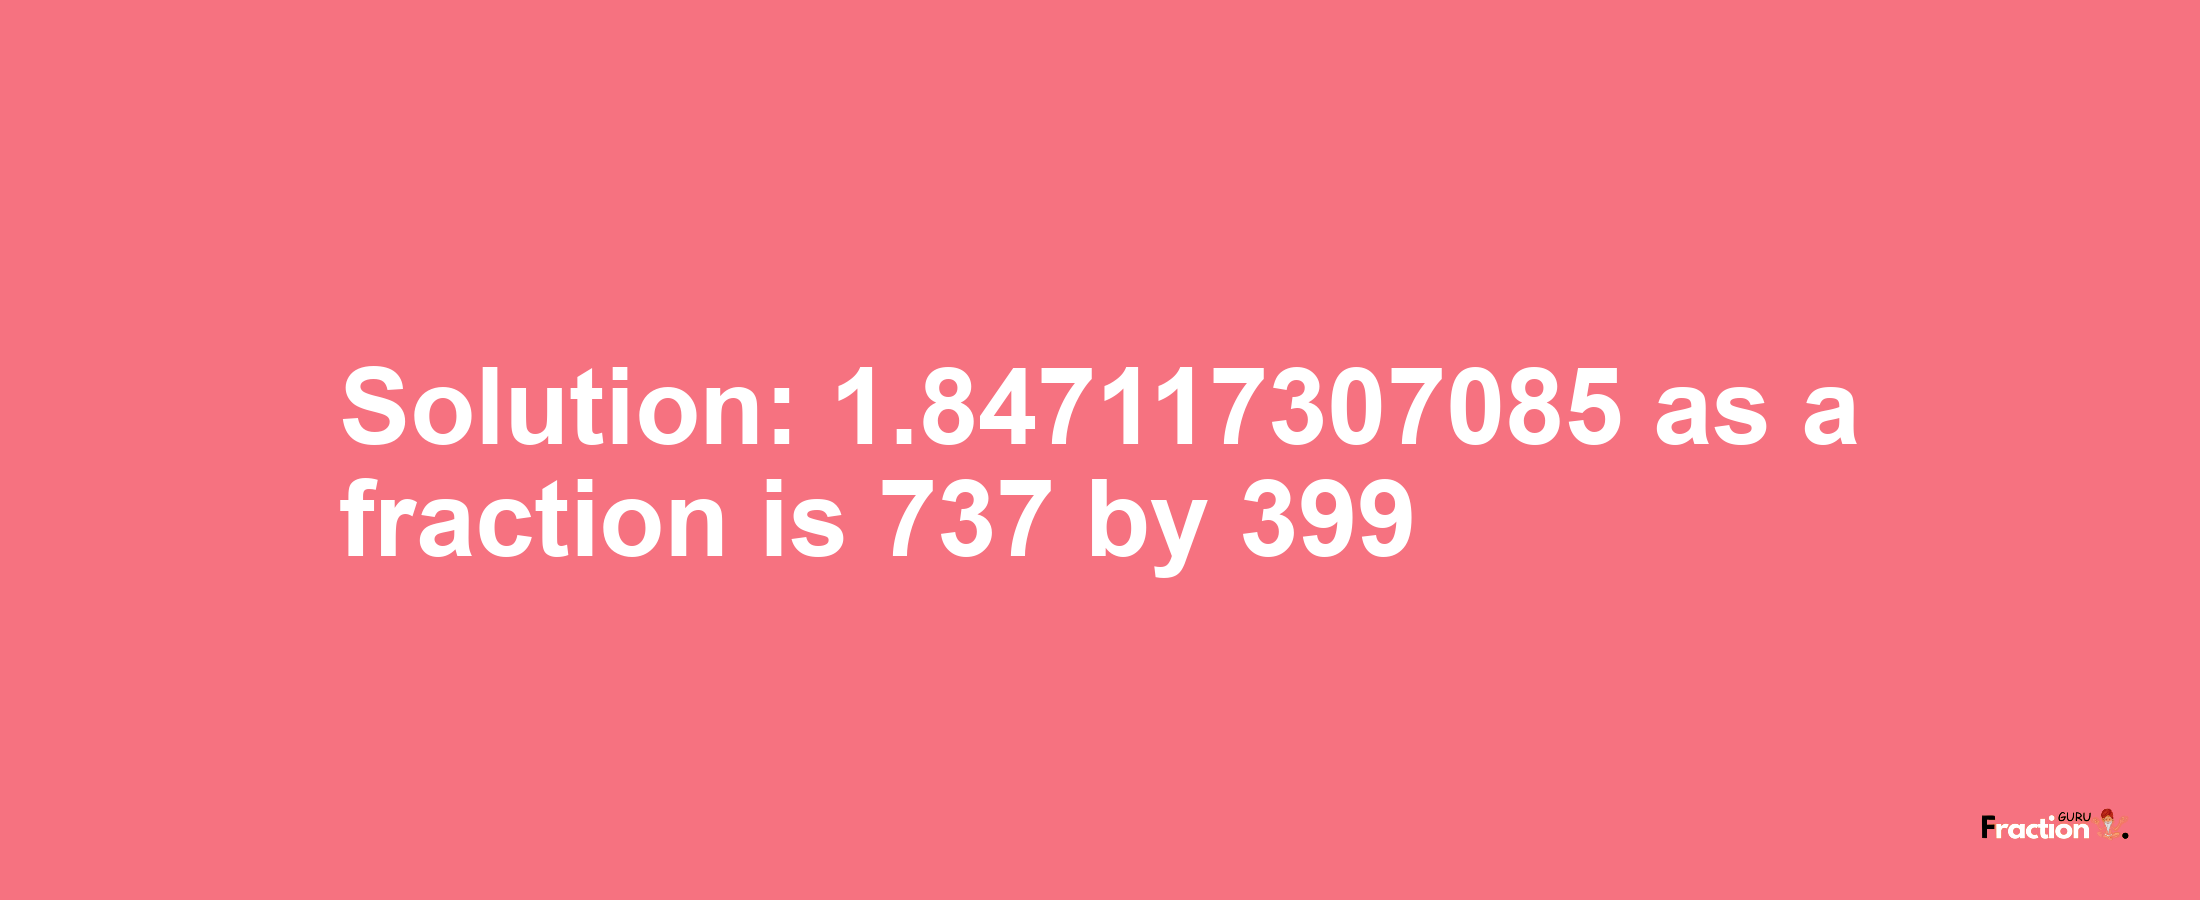 Solution:1.847117307085 as a fraction is 737/399